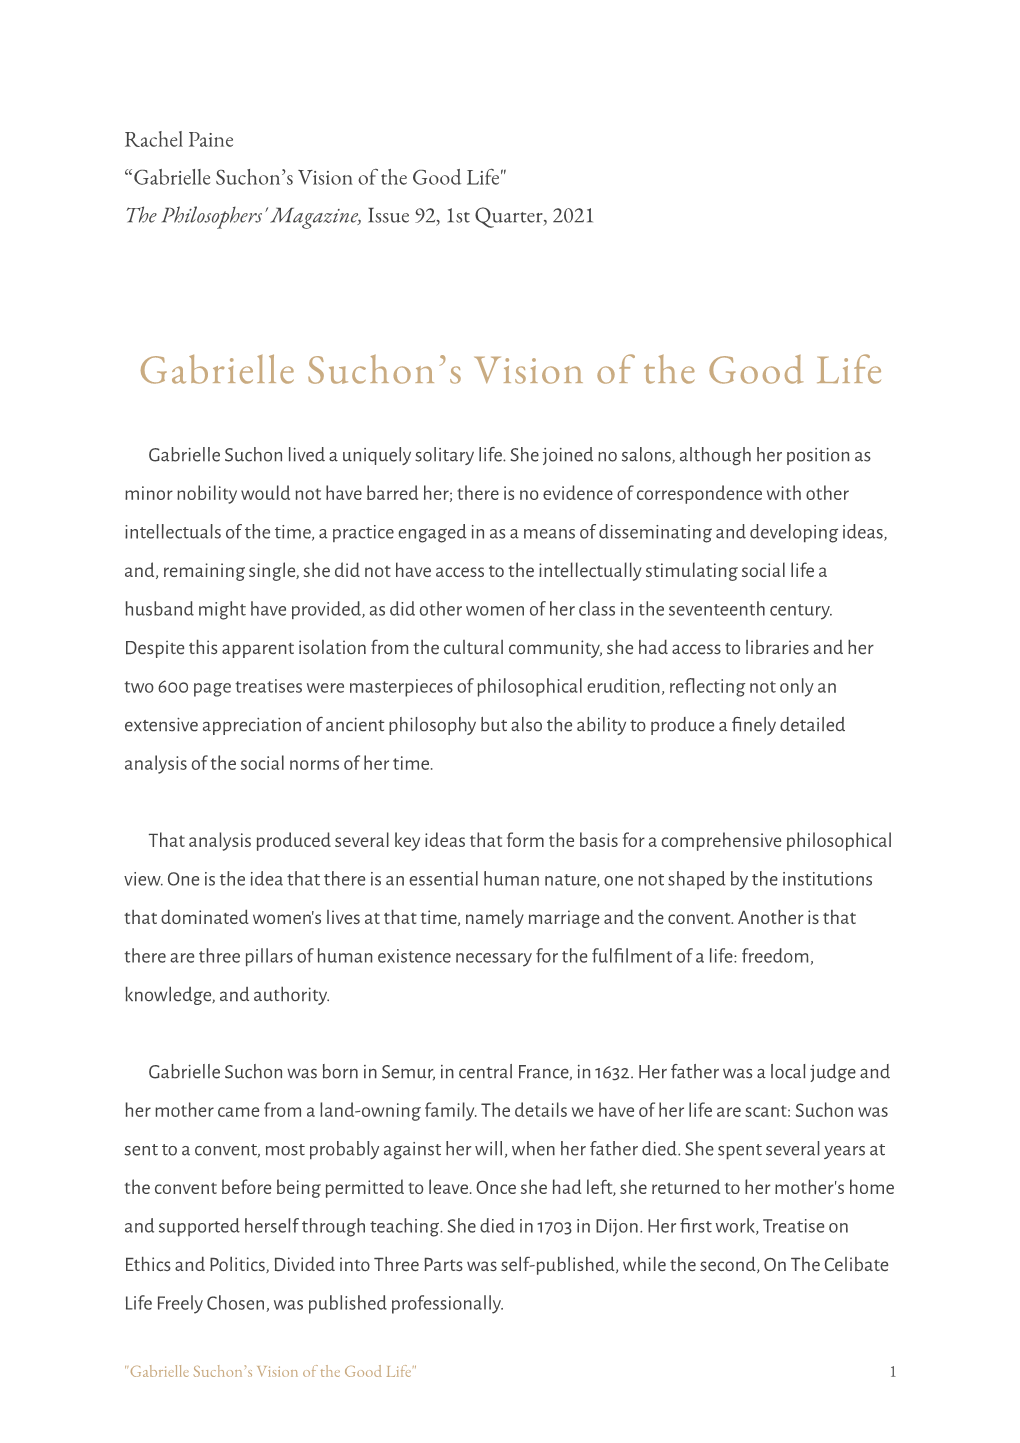 Gabrielle Suchon's Vision of the Good Life